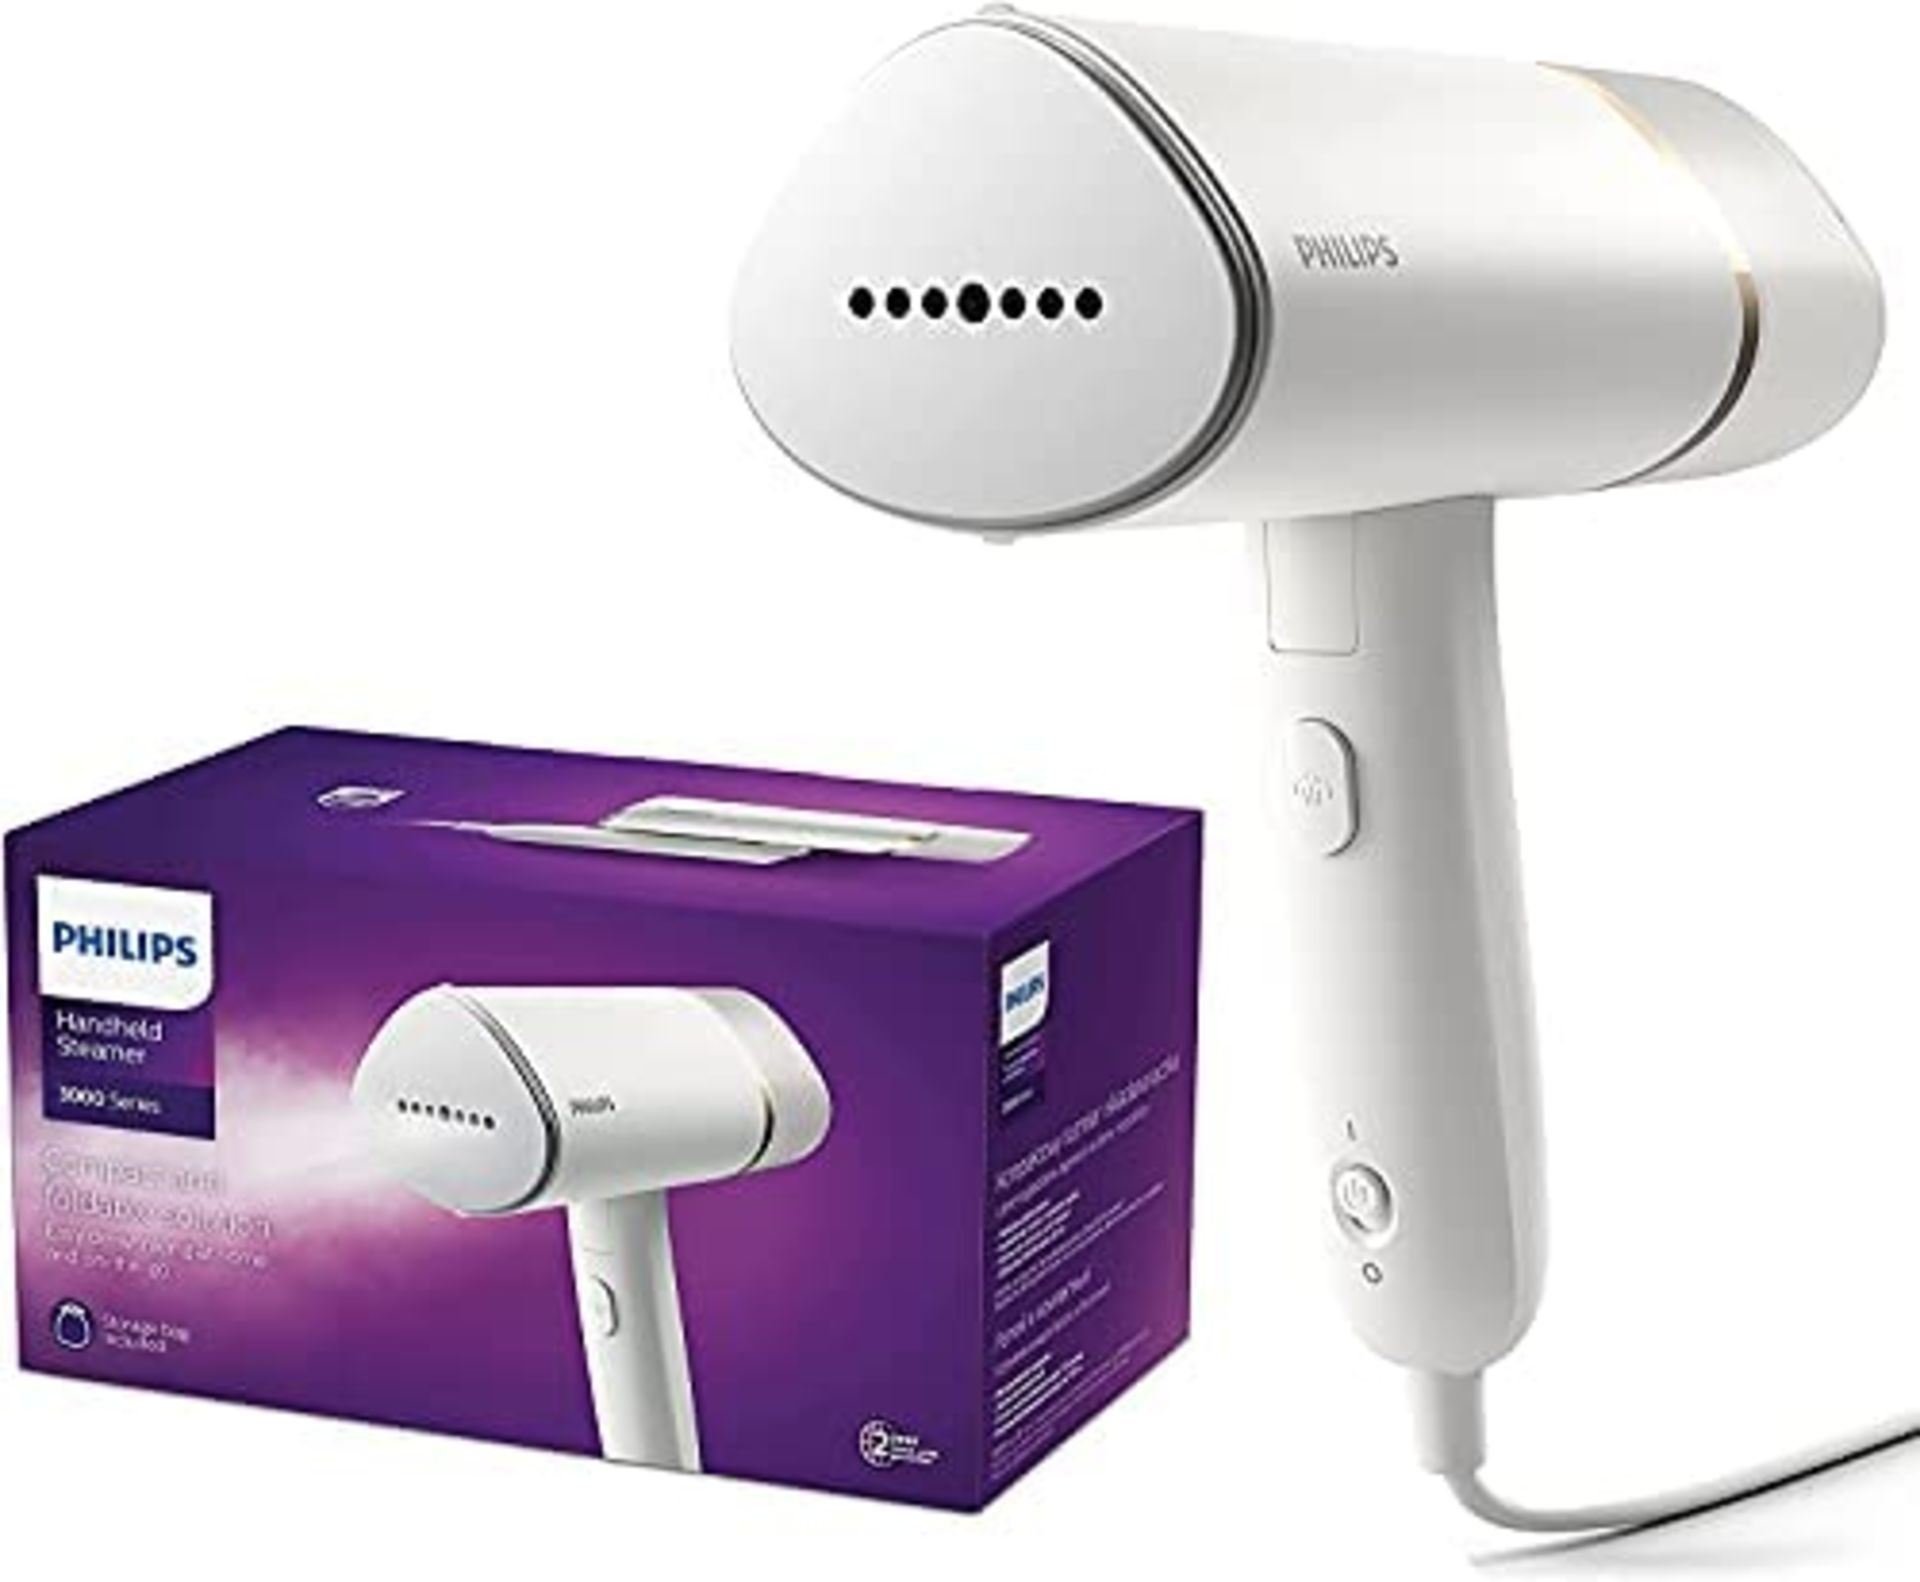 RRP -£42.49 Philips Handheld Steamer 3000 Series, Compact and Foldable - Image 2 of 2